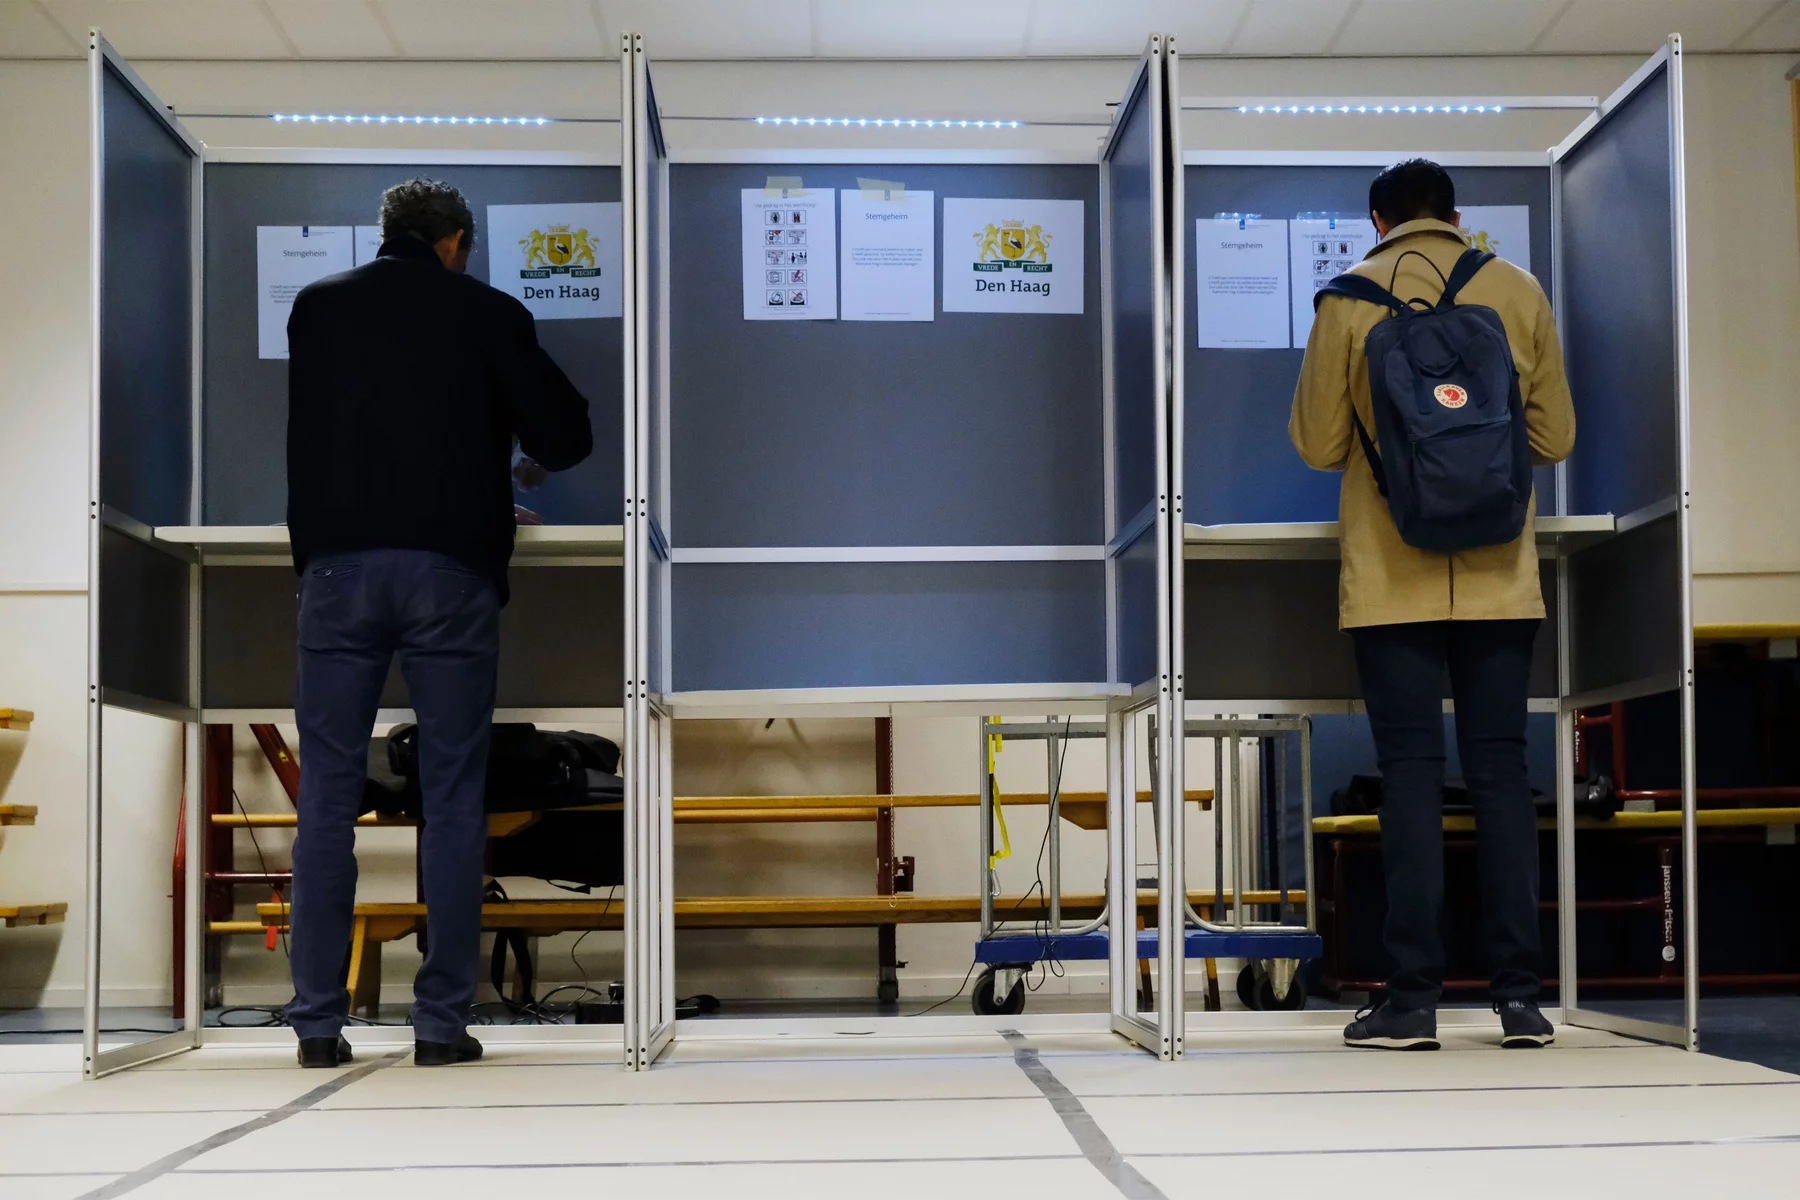 Dutch voters casting ballots in The Hague